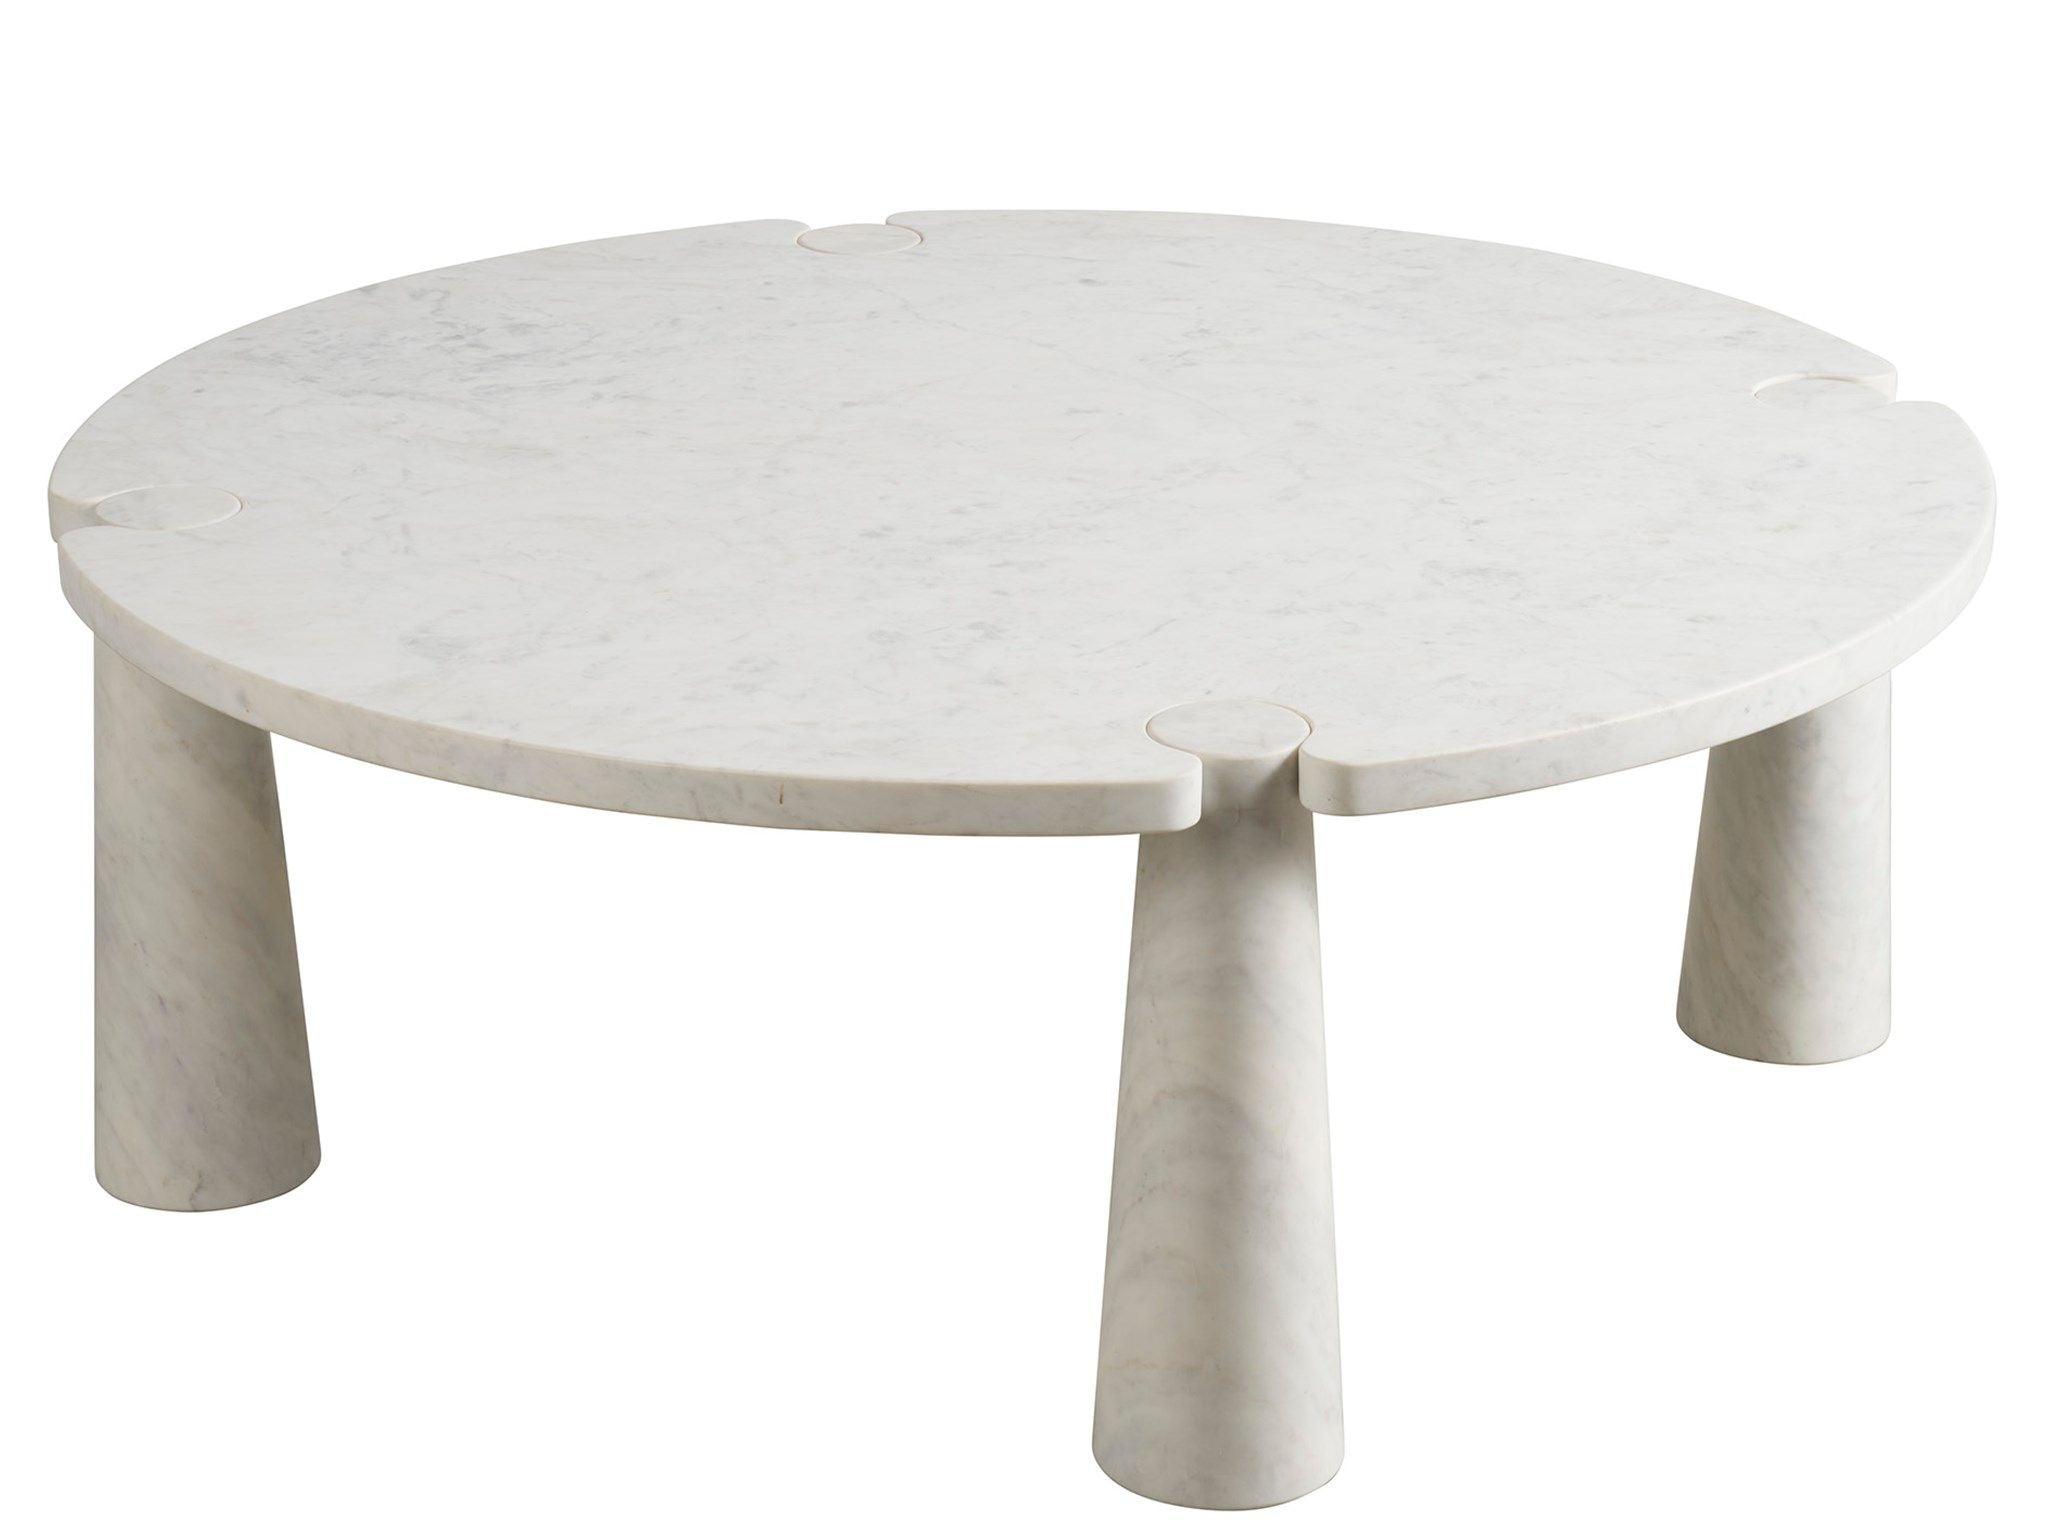 Universal Furniture - New Modern - Anniston Cocktail Table - White - 5th Avenue Furniture